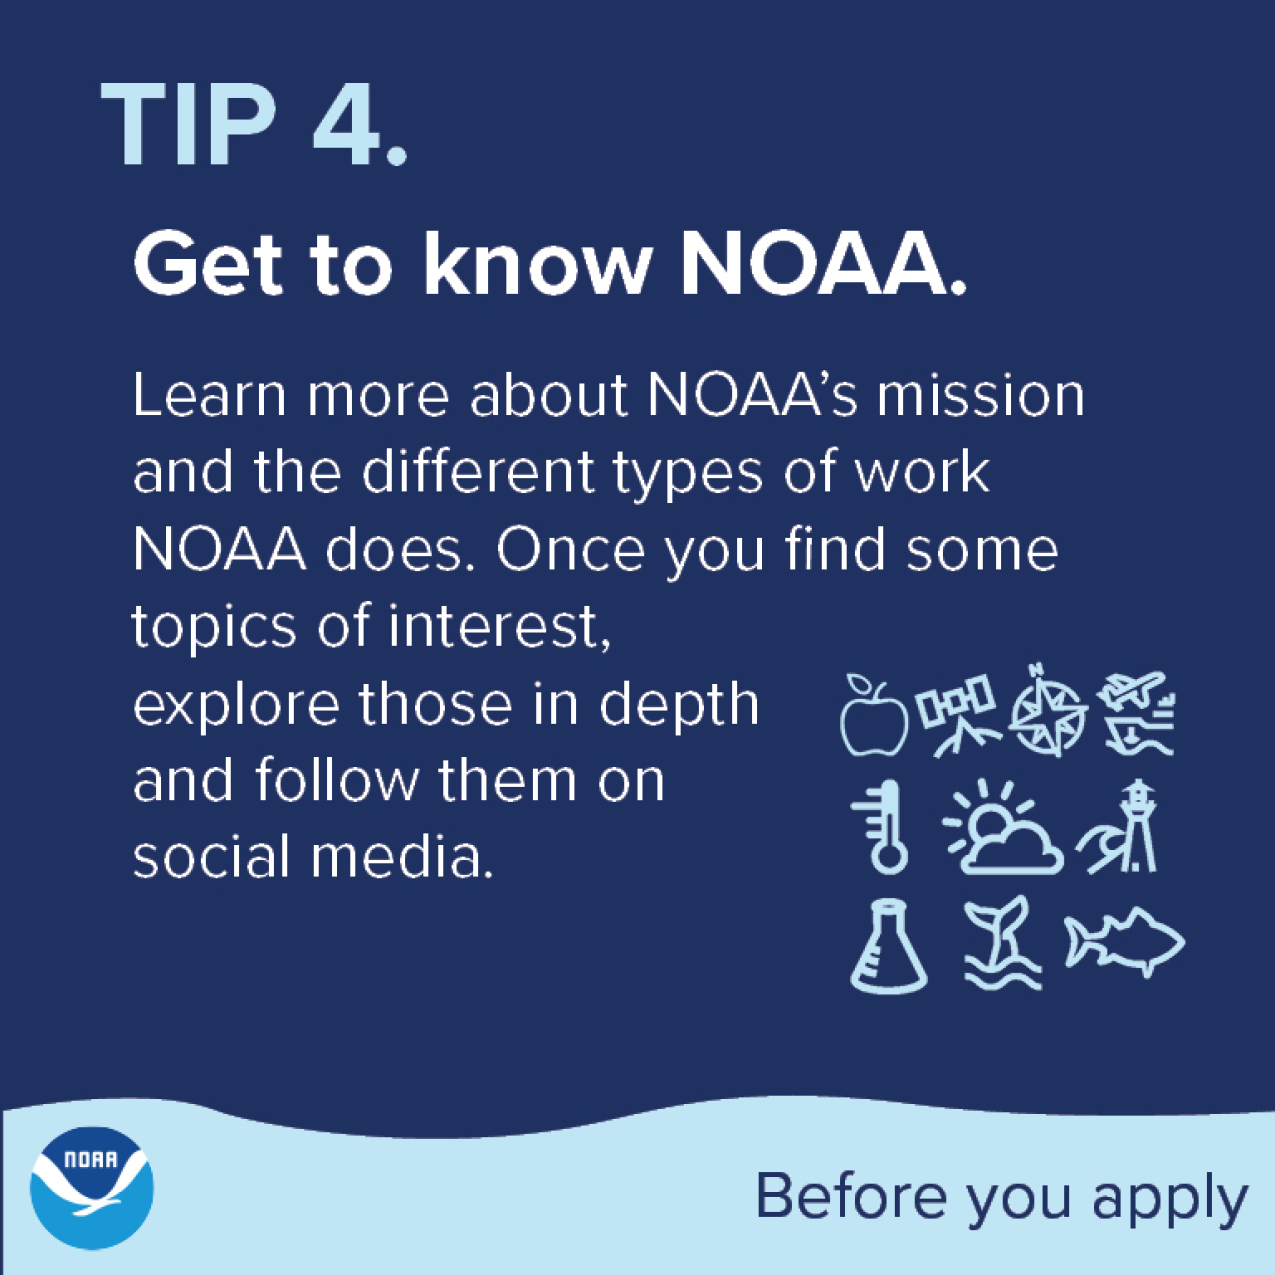 Tip 4. Get to know NOAA.  Learn more about NOAA’s mission and the different types of work NOAA does. Once you find some topics of interest, explore those in depth and follow them on social media.